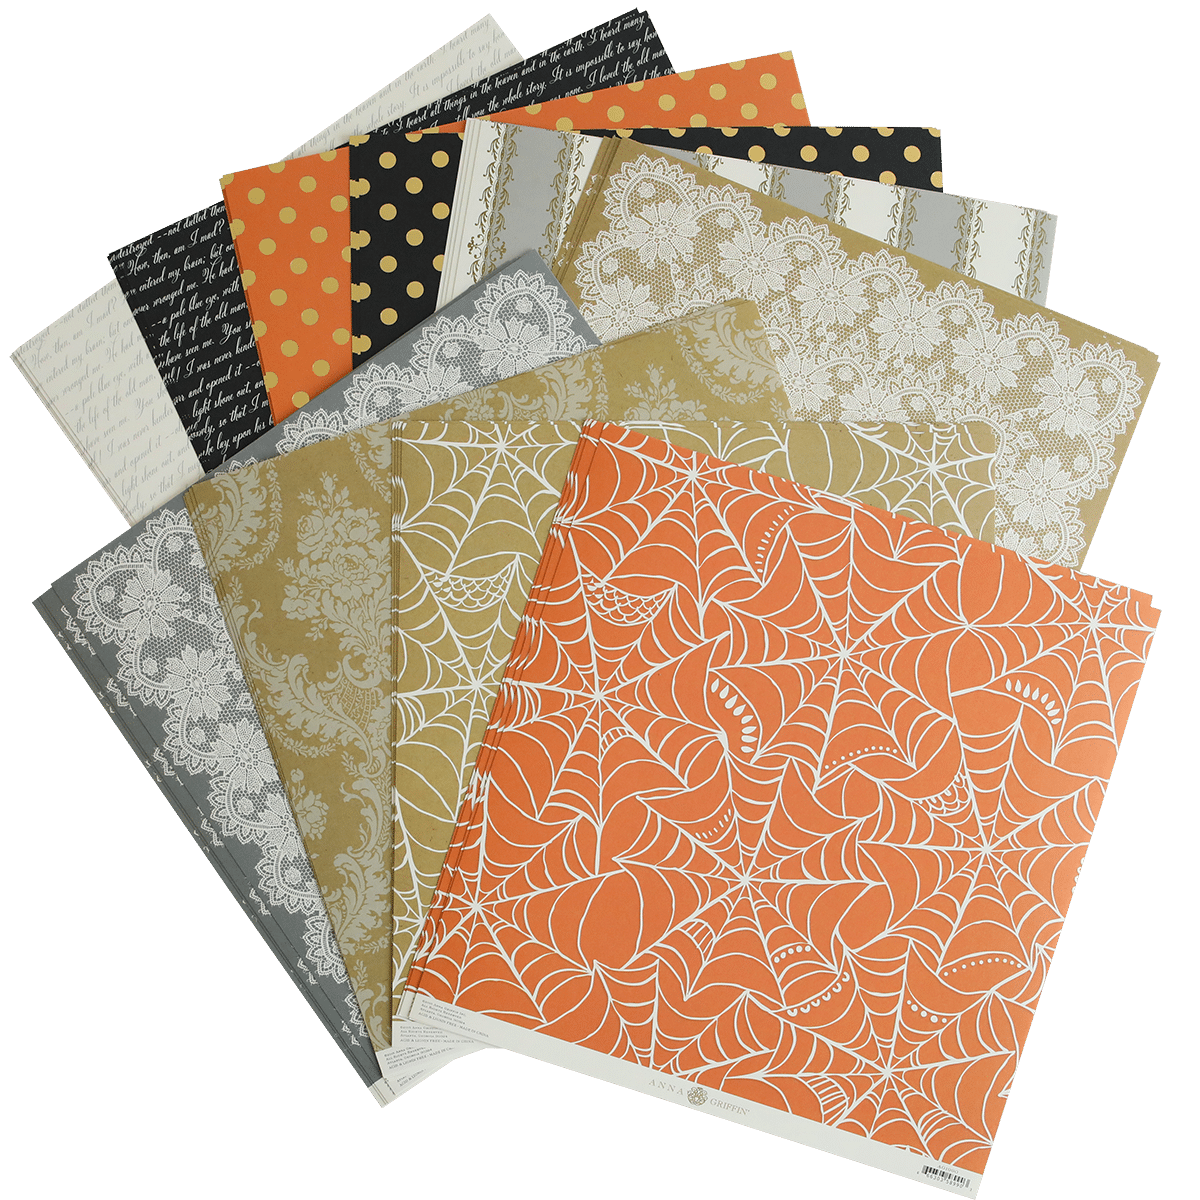 A collection of Endora Halloween 12x12 Cardstock papers with black, orange and white designs.